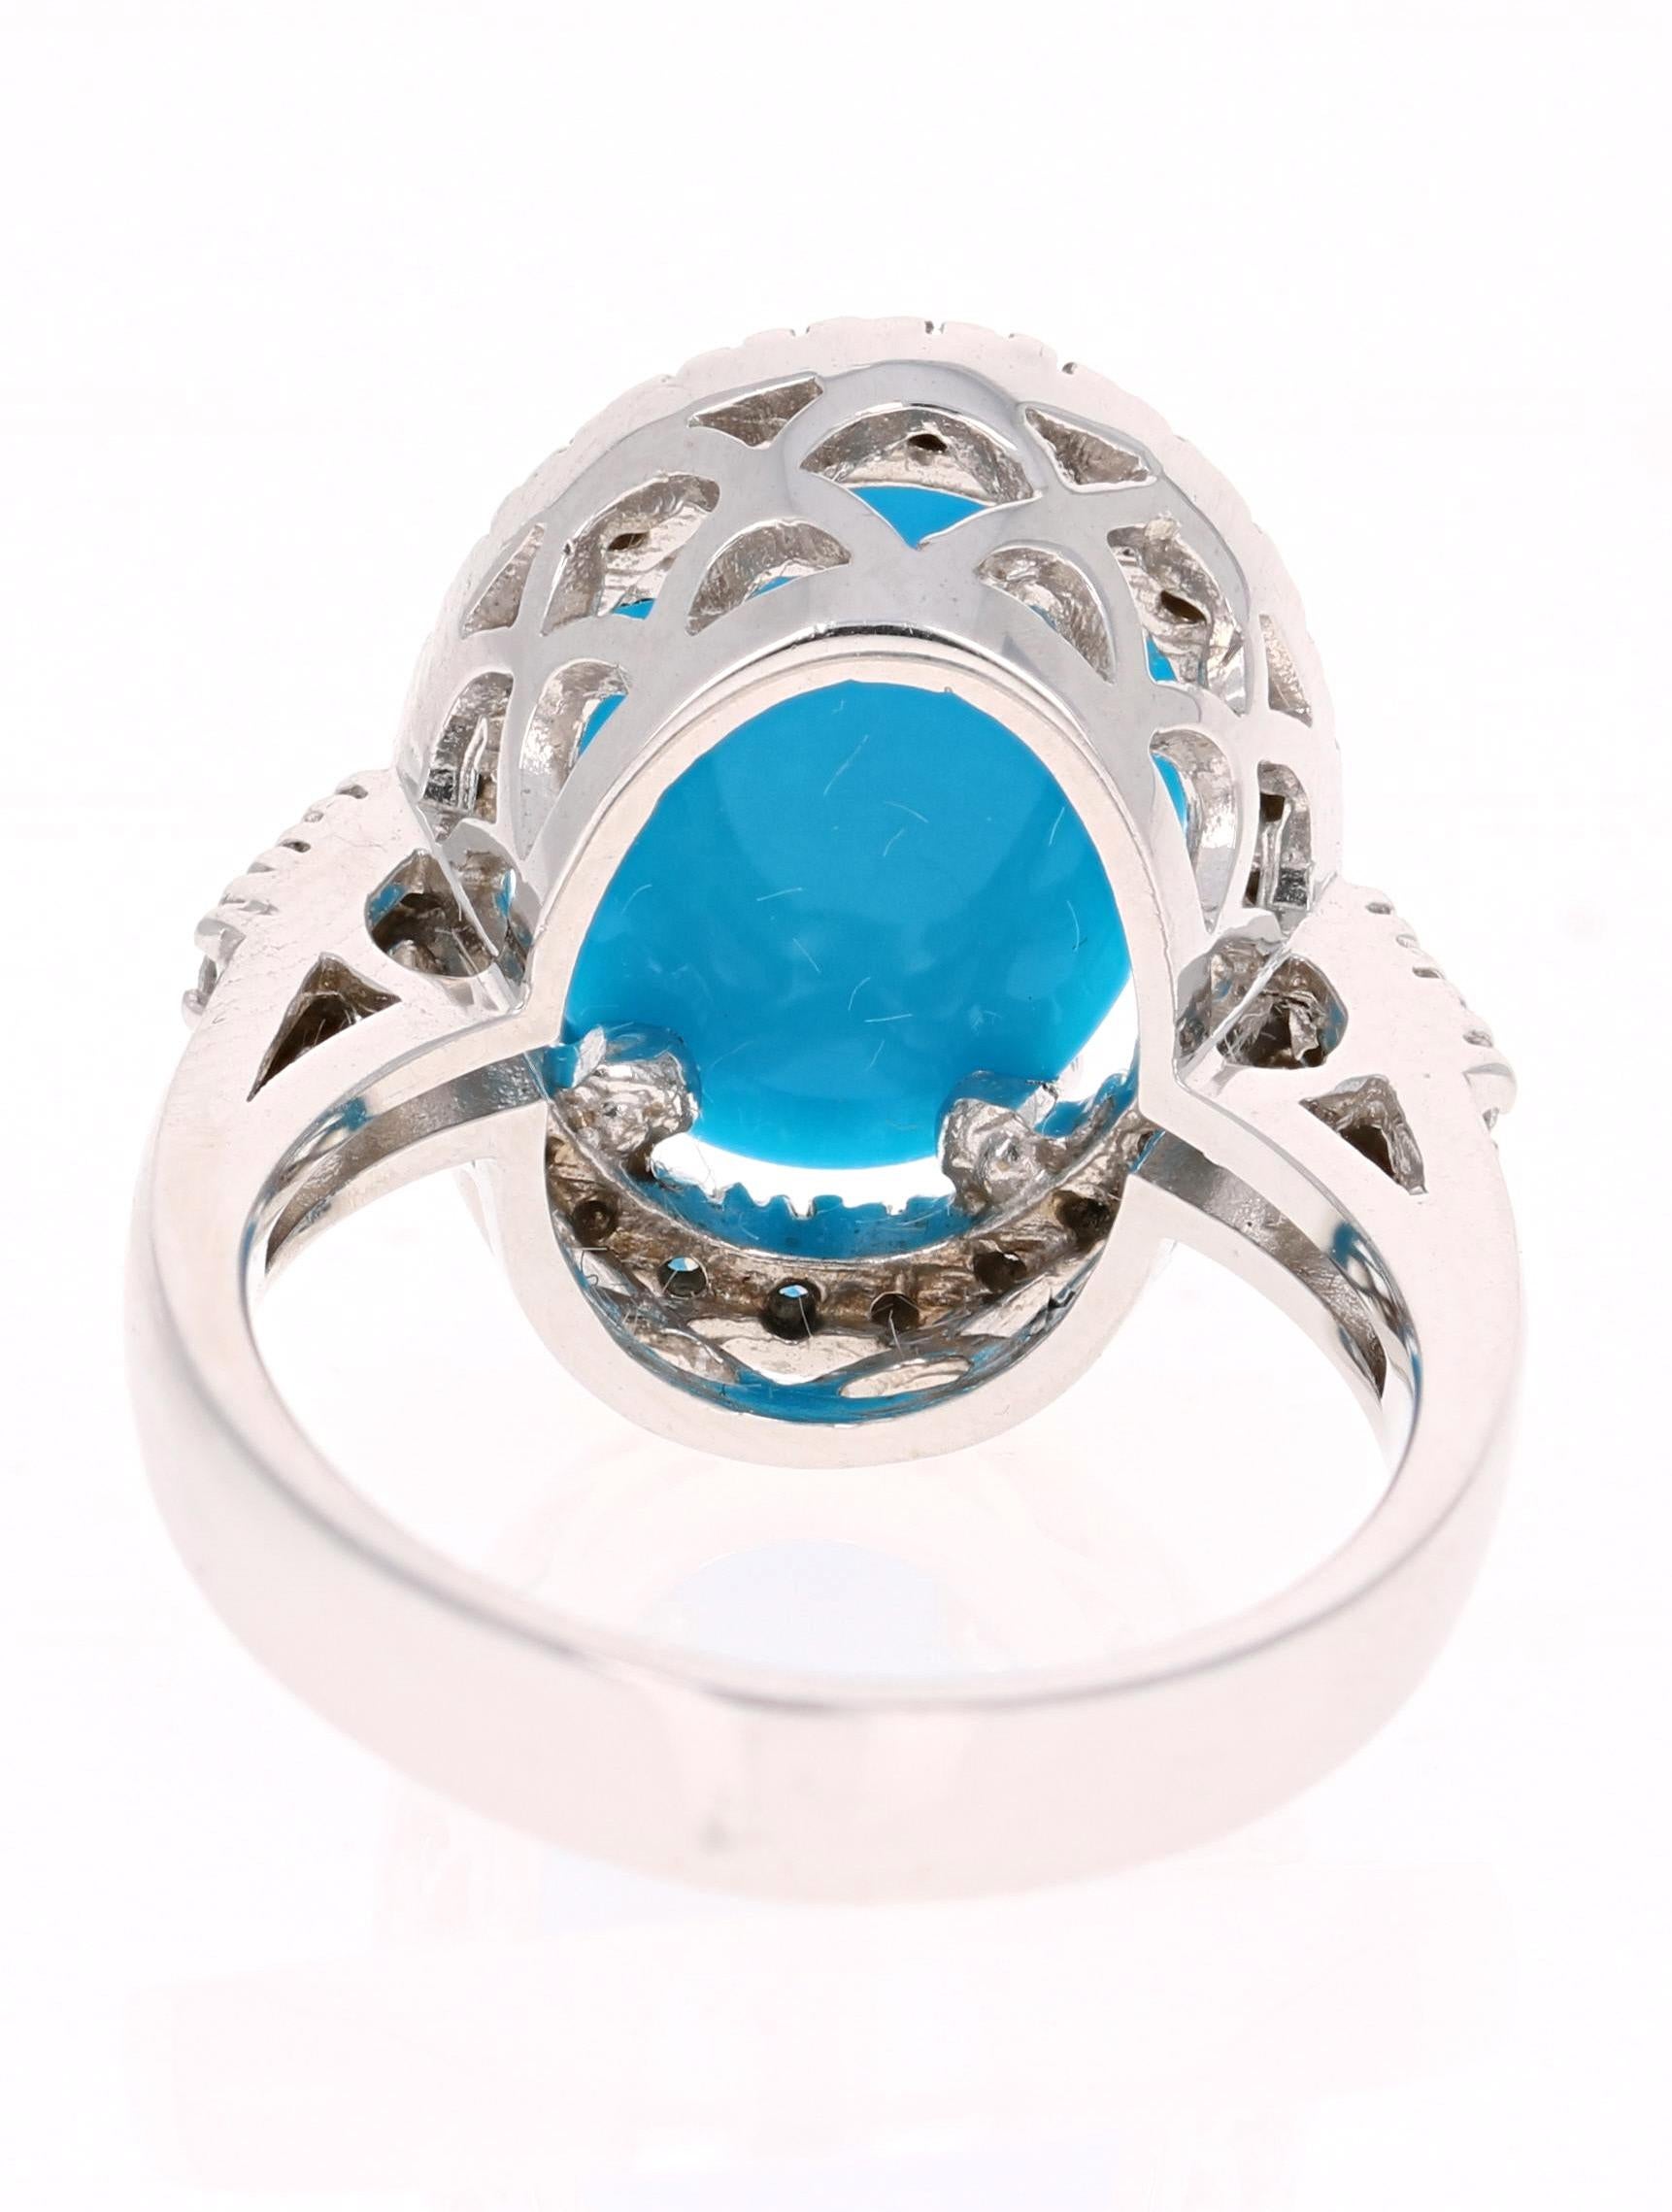 5.26 Carat Oval Cut Turquoise Diamond White Gold Fashion Ring In New Condition For Sale In Los Angeles, CA